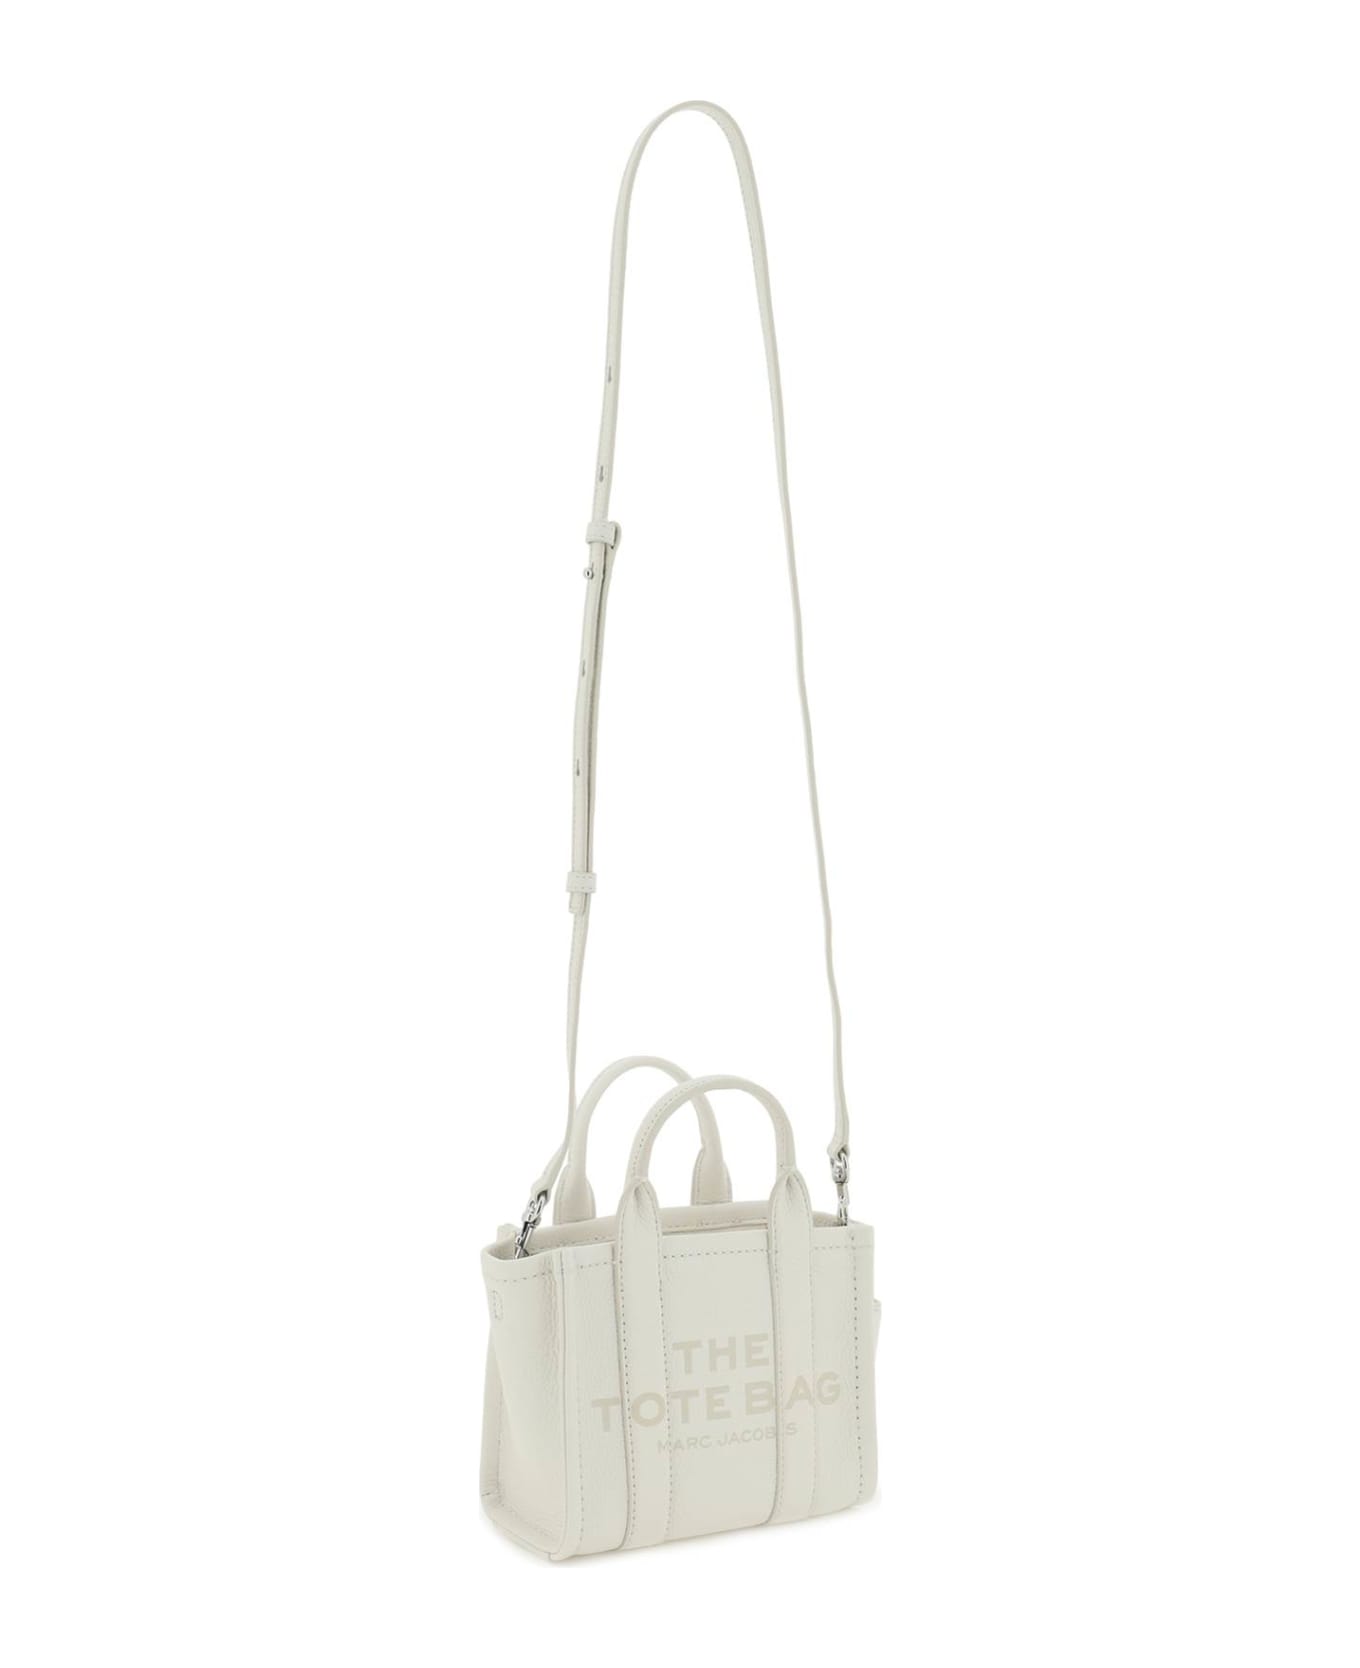 Marc Jacobs 'the Leather Micro Tote Bag' - Cotton/silver トートバッグ